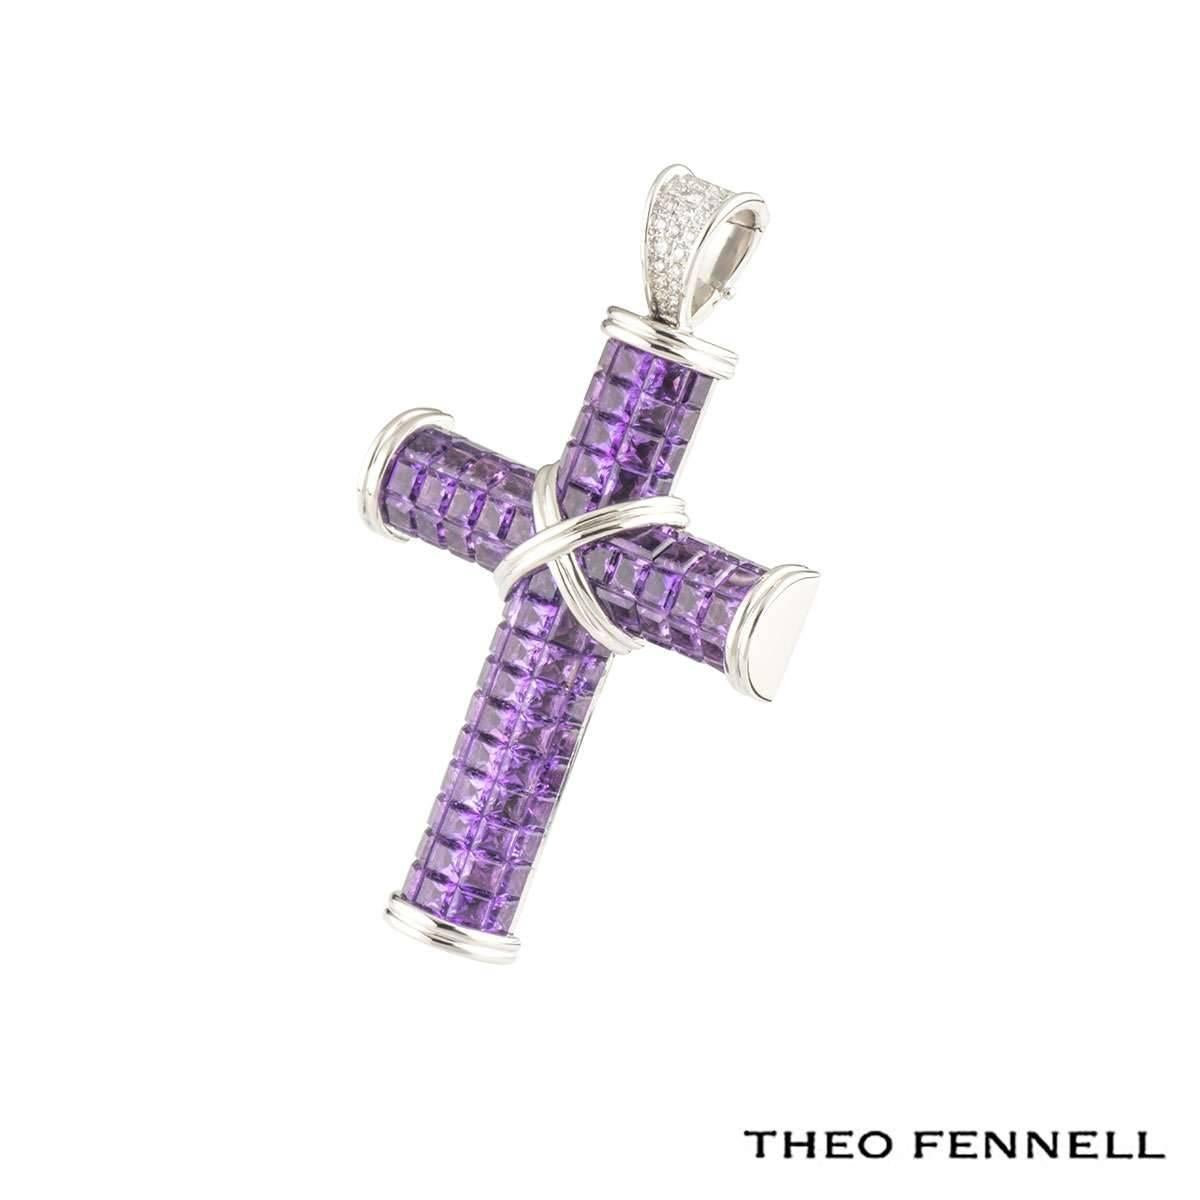 theo fennell pendant